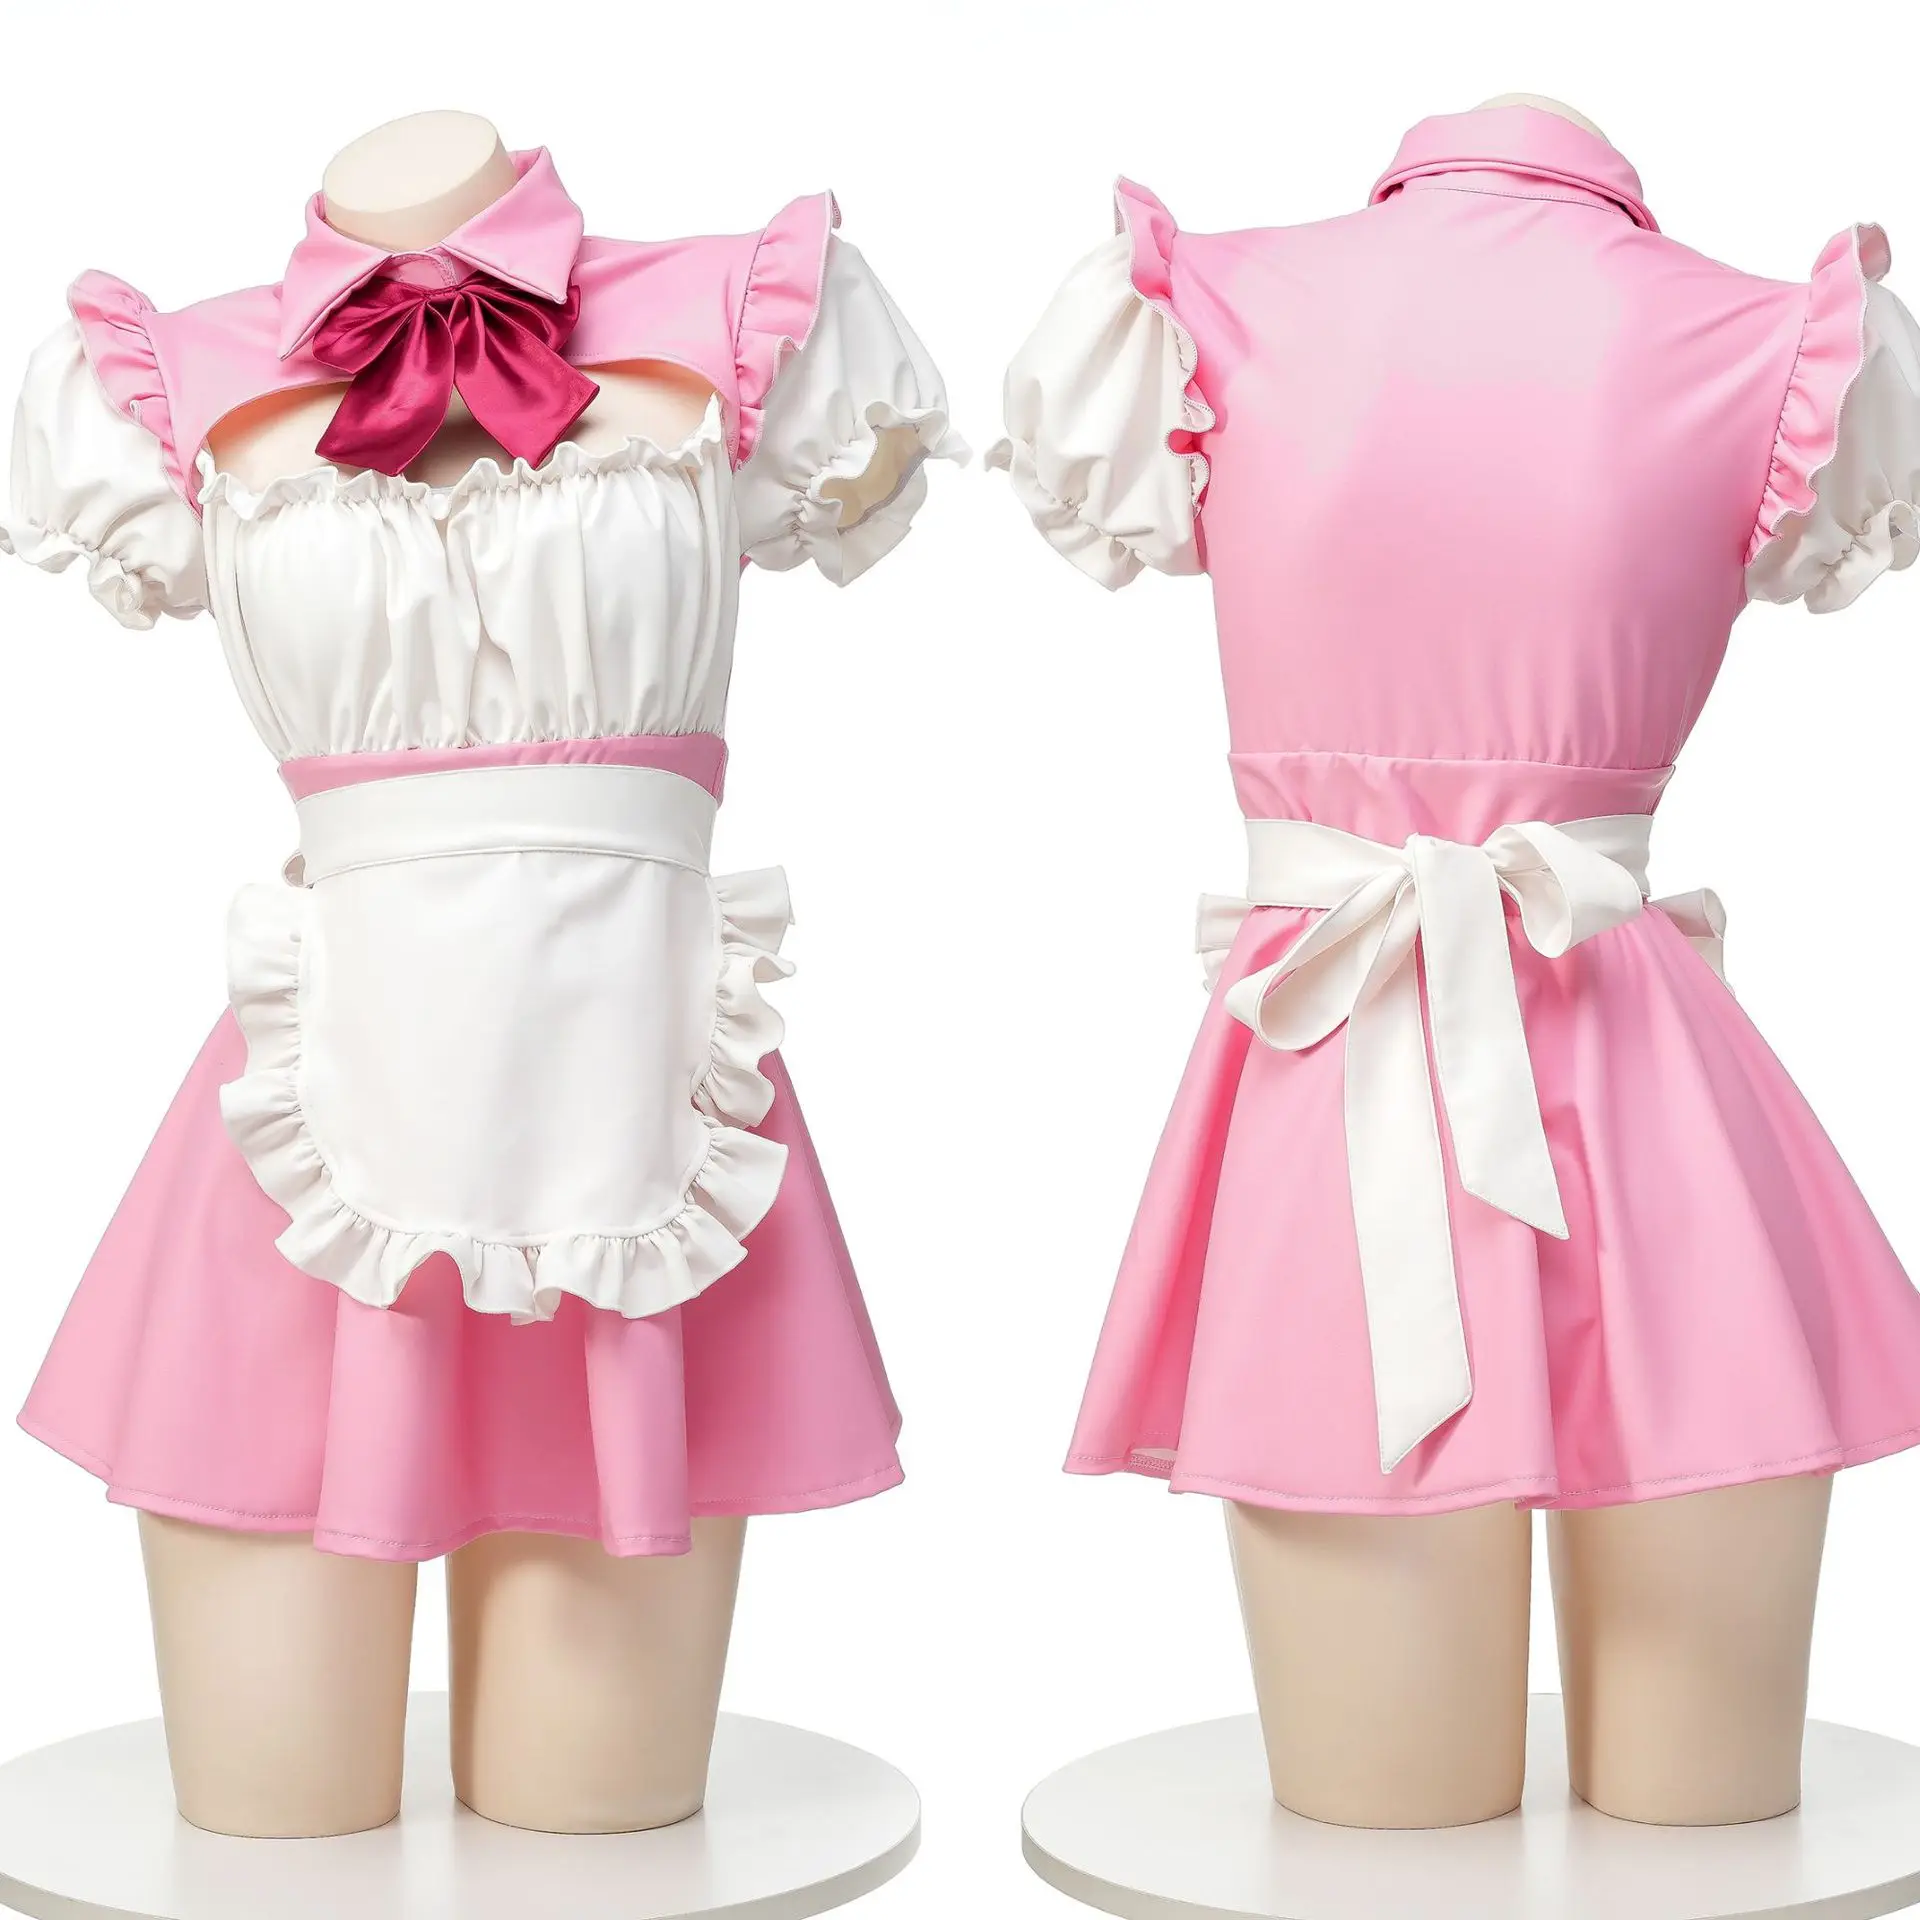 

Japanese Sexy Lolita Role-playing Costumes Sakura Maid Outfit Lorie Anime Pink Patent leather Dress for Girl and Women